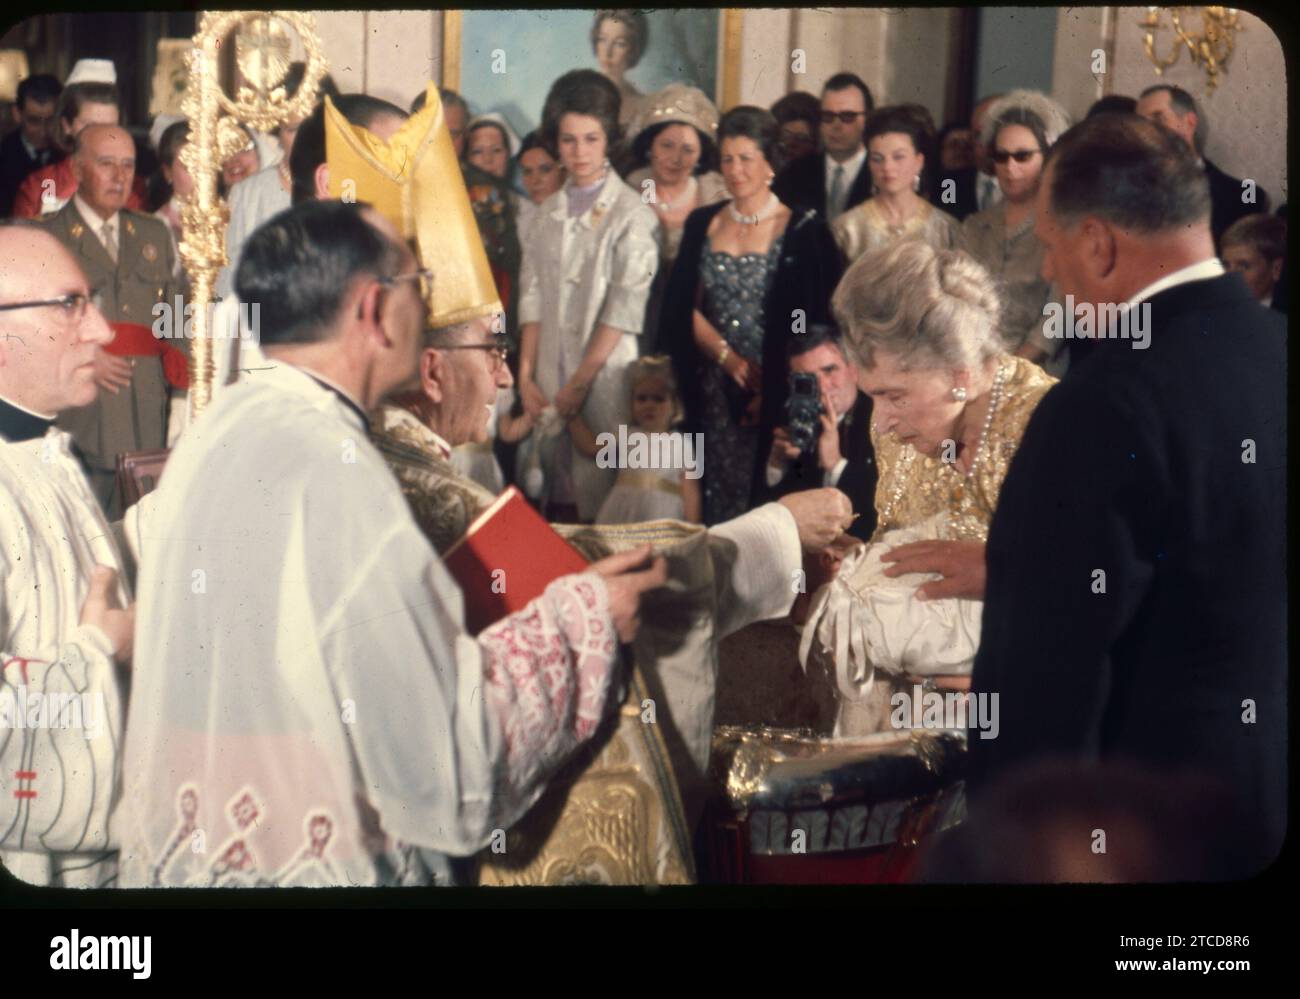 Madrid, 02/08/1968. Baptism of the infant Don Felipe in the Zarzuela Palace. In the image, the Archbishop of Madrid pours the baptismal waters over the head of the newborn, who is sponsored by Queen Victoria Eugenia and the Count of Barcelona. In the background, crouching, ABC photographer José Sánchez Martínez. Credit: Album / Archivo ABC / Jaime Pato,Álvaro García Pelayo,José Sánchez Martínez Stock Photo